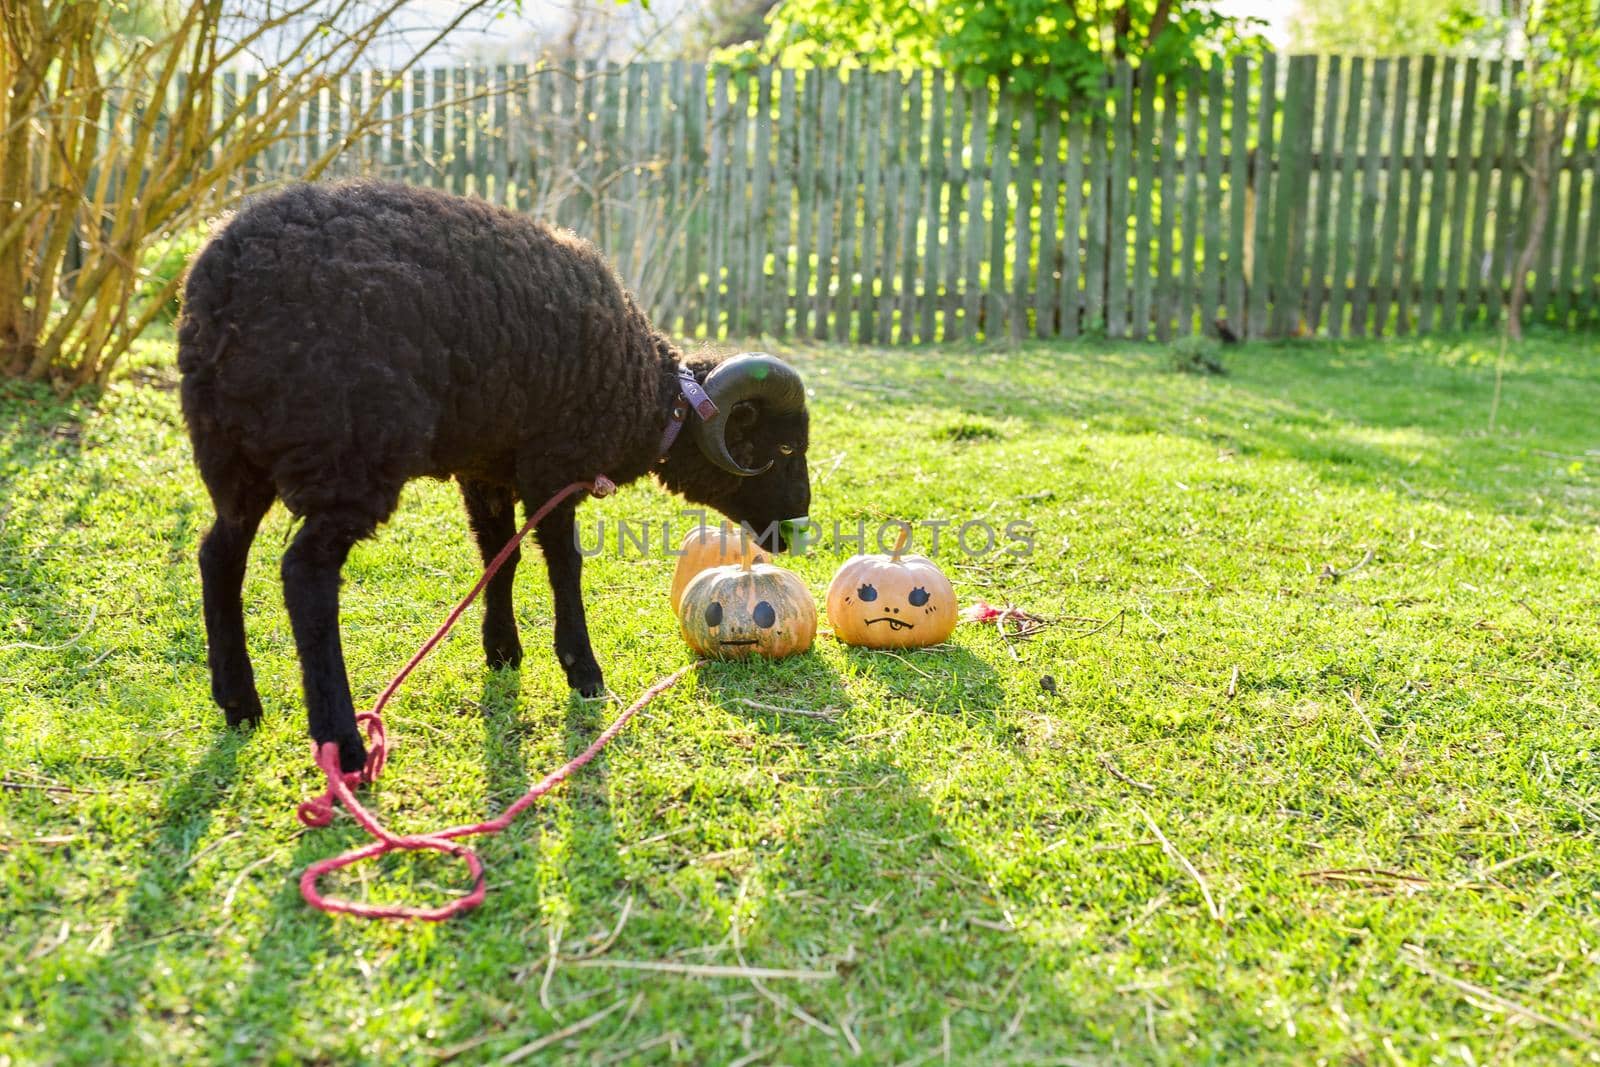 Ram and decorated Halloween pumpkins, ram grazing on the grass in garden by VH-studio